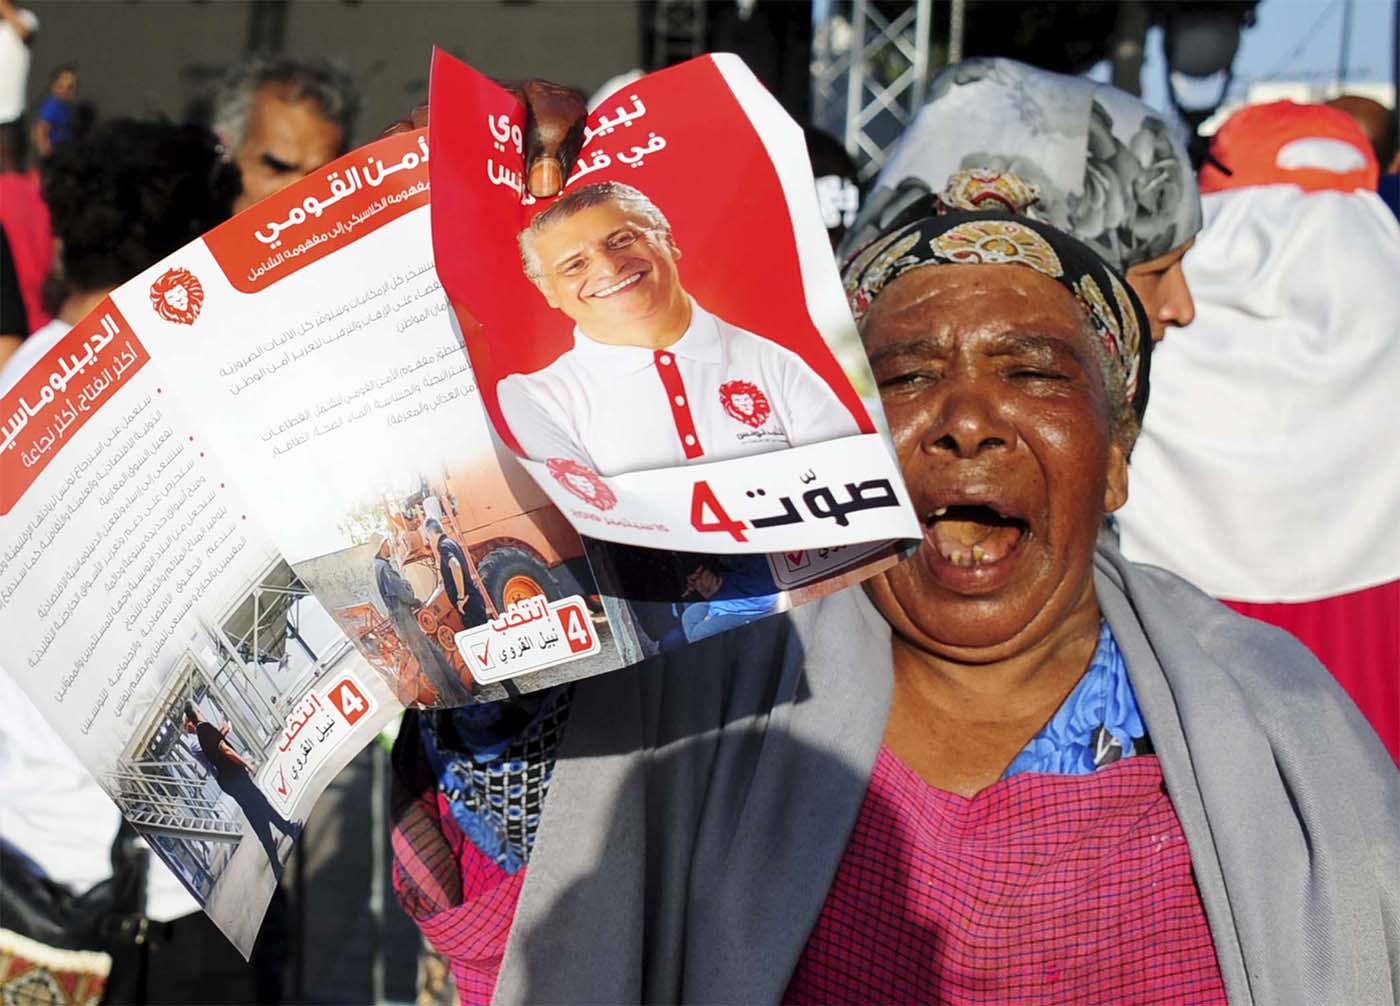 A supporter of jailed Tunisian presidential candidate Nabil Karoui shows his portrait during a gathering in Tunis